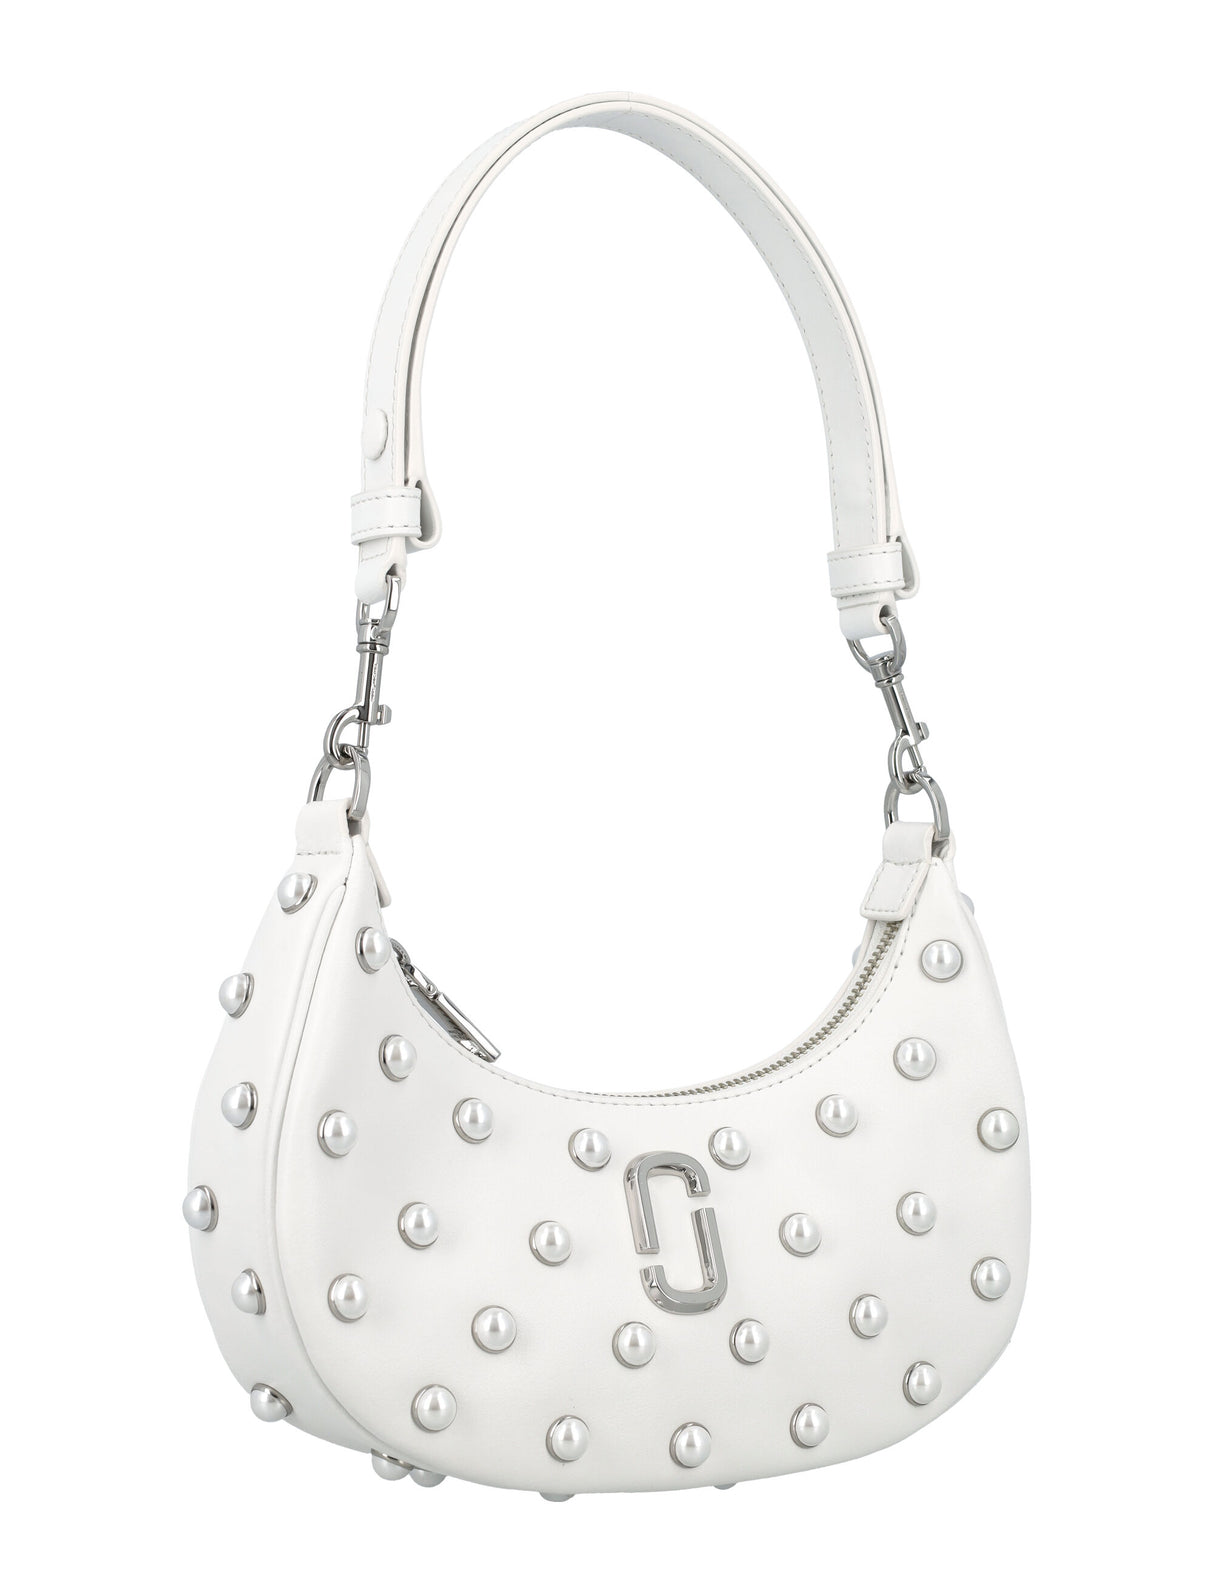 MARC JACOBS Mini Curve Pearl White Leather Crossbody Bag with Faux Pearl Accents